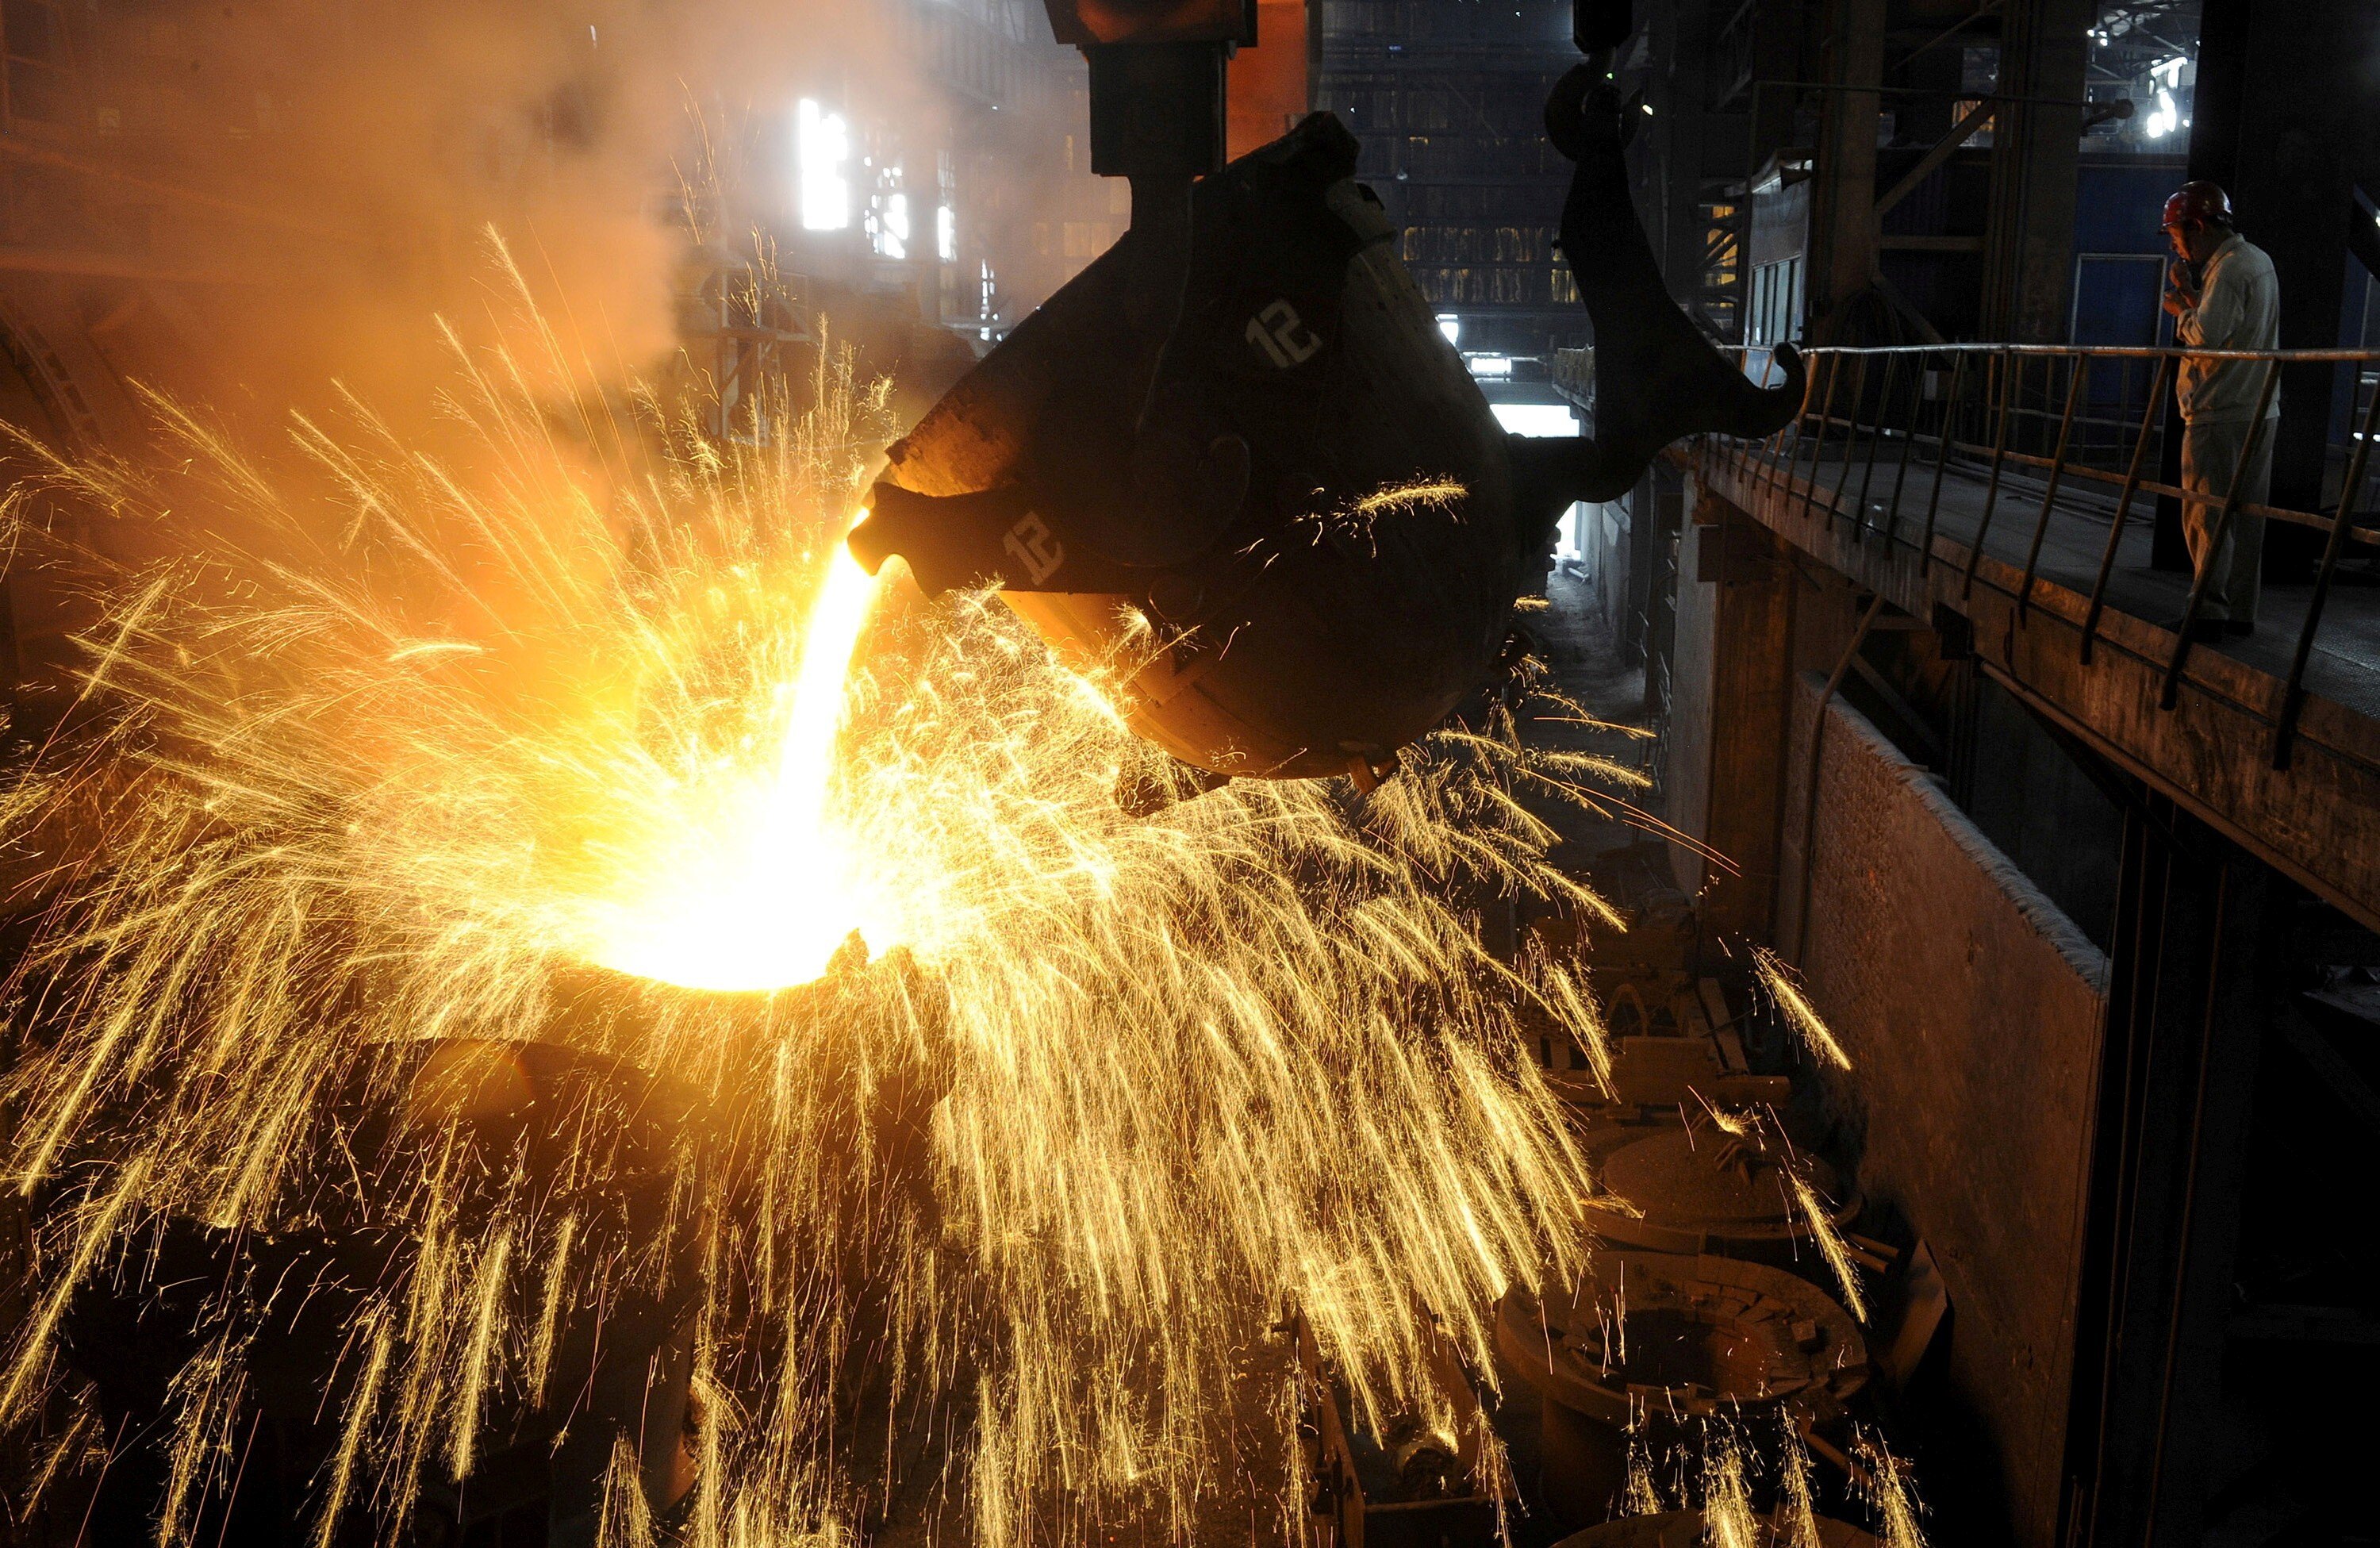 An employee monitors molten iron being poured into a container at a steel plant in Hefei, Anhui province in September 2013. Photo: Reuters